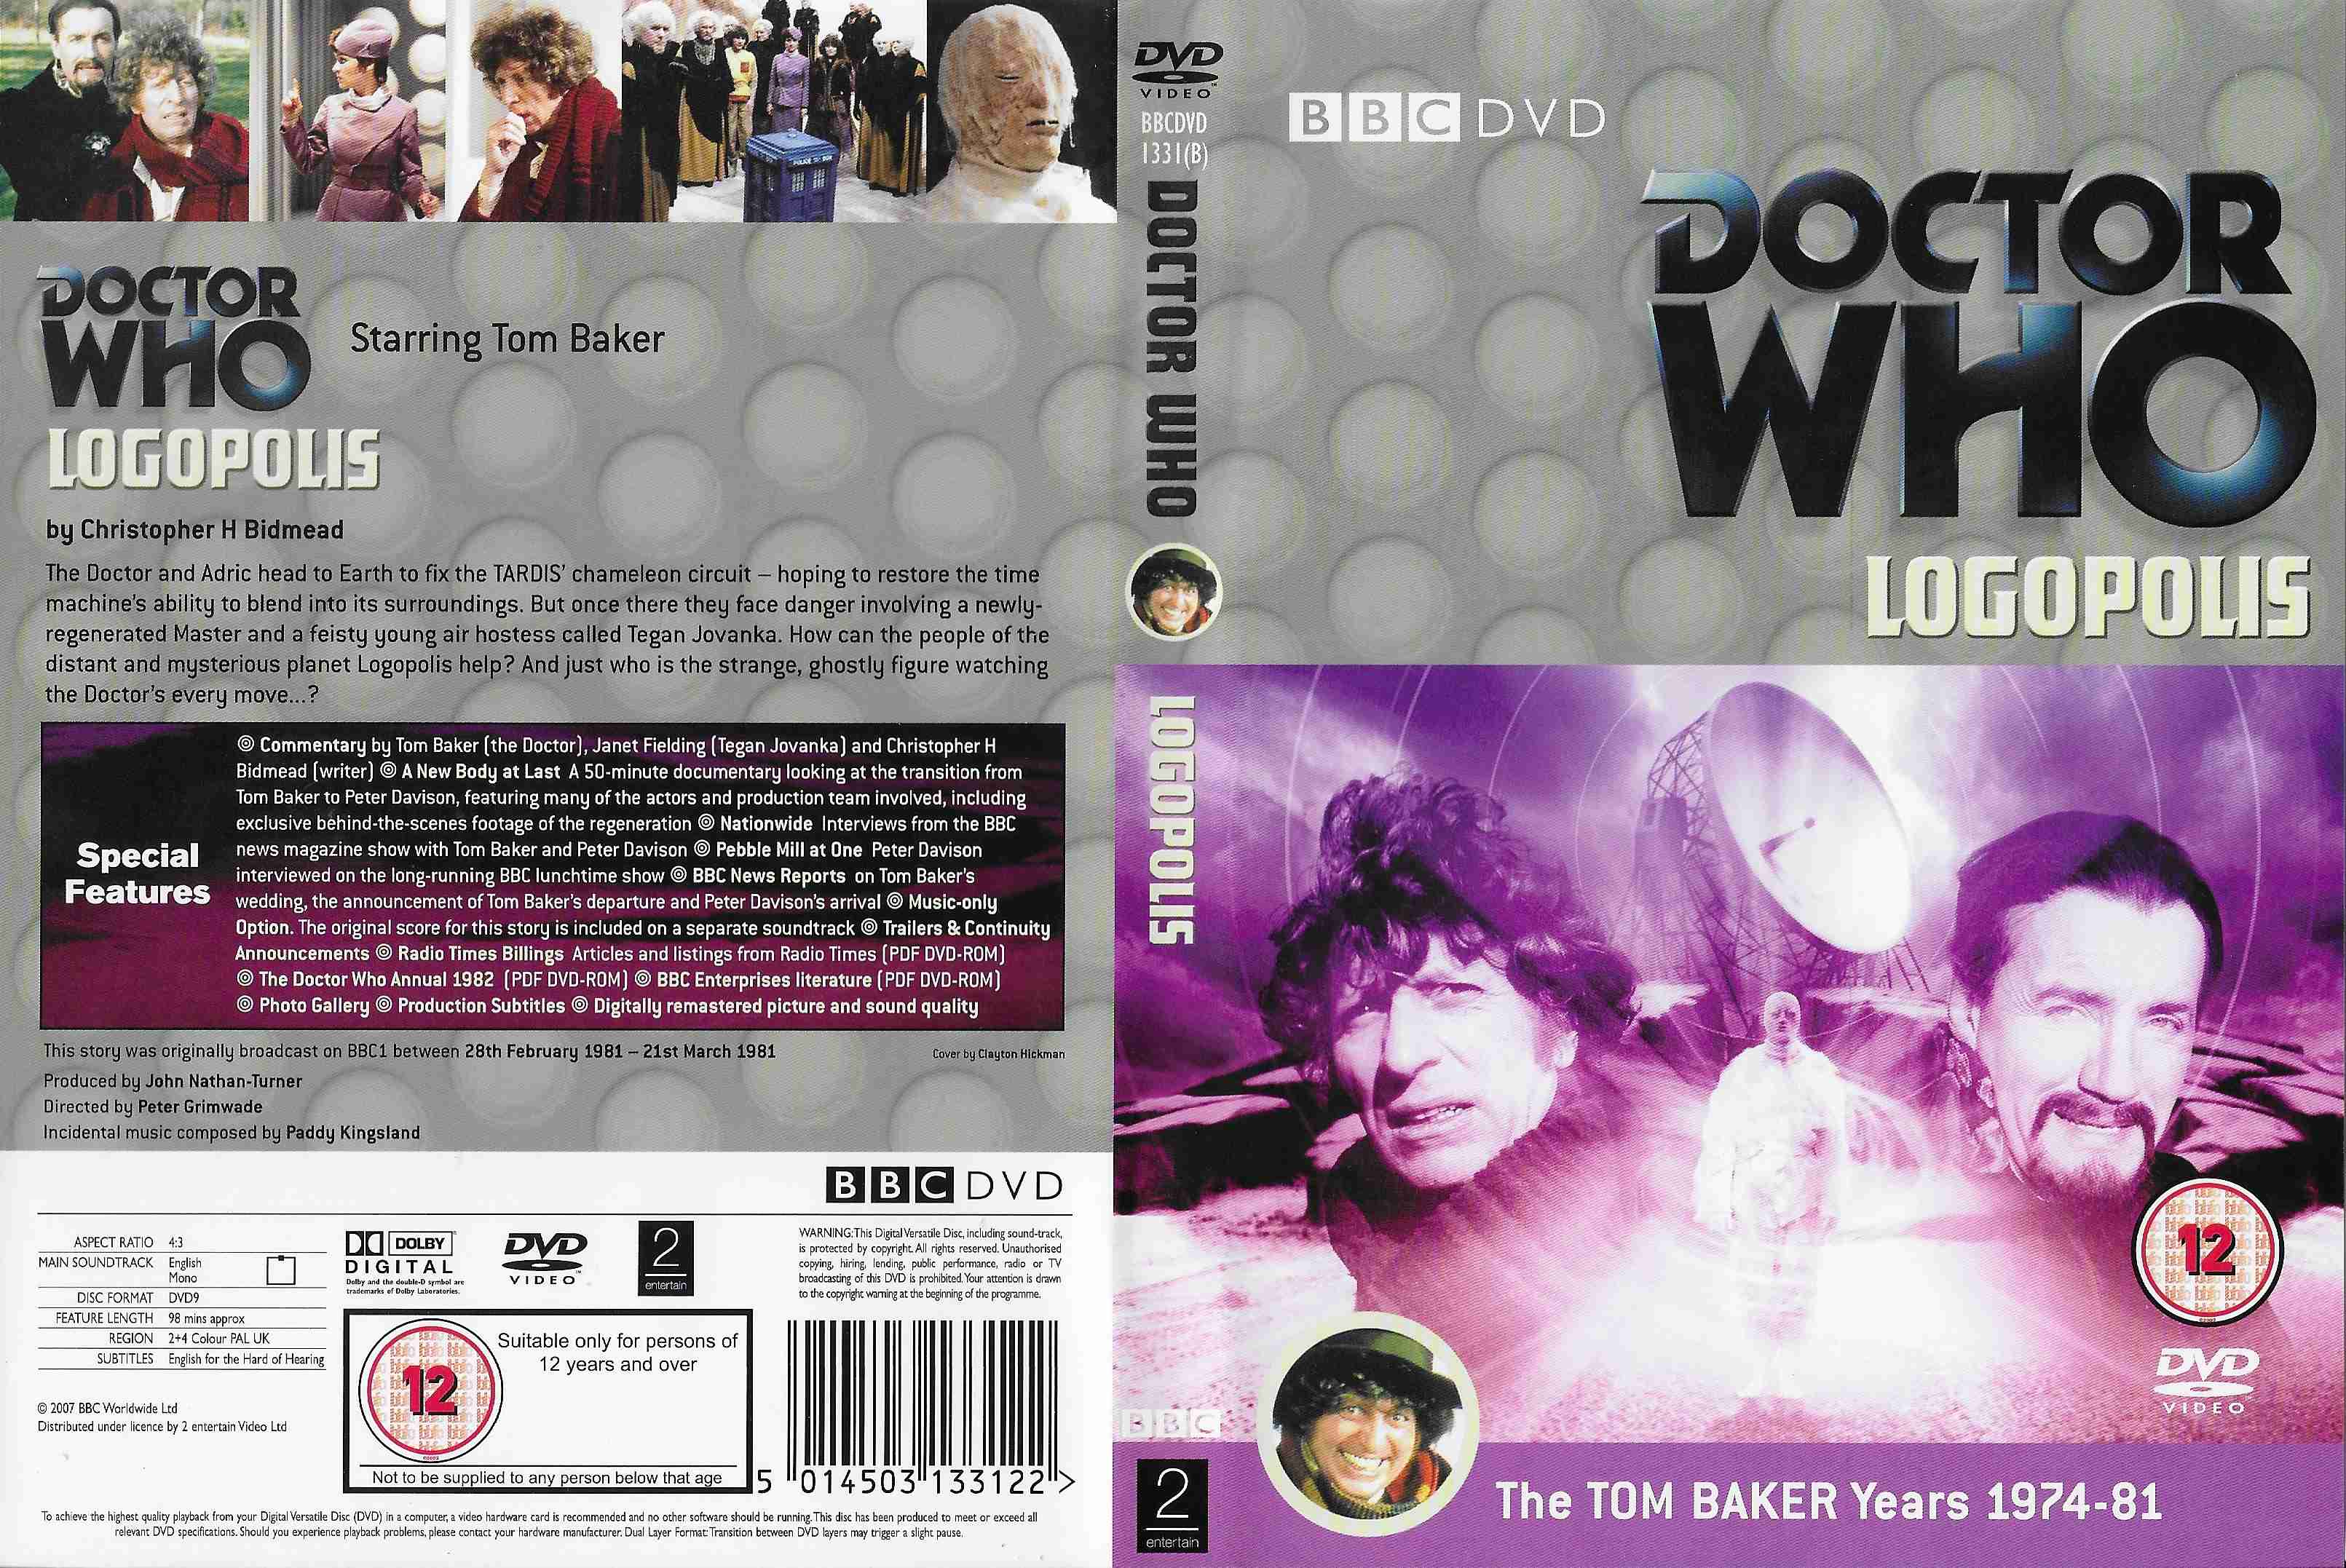 Picture of BBCDVD 1331B Doctor Who - Logopolis by artist Johnny Byrne from the BBC records and Tapes library